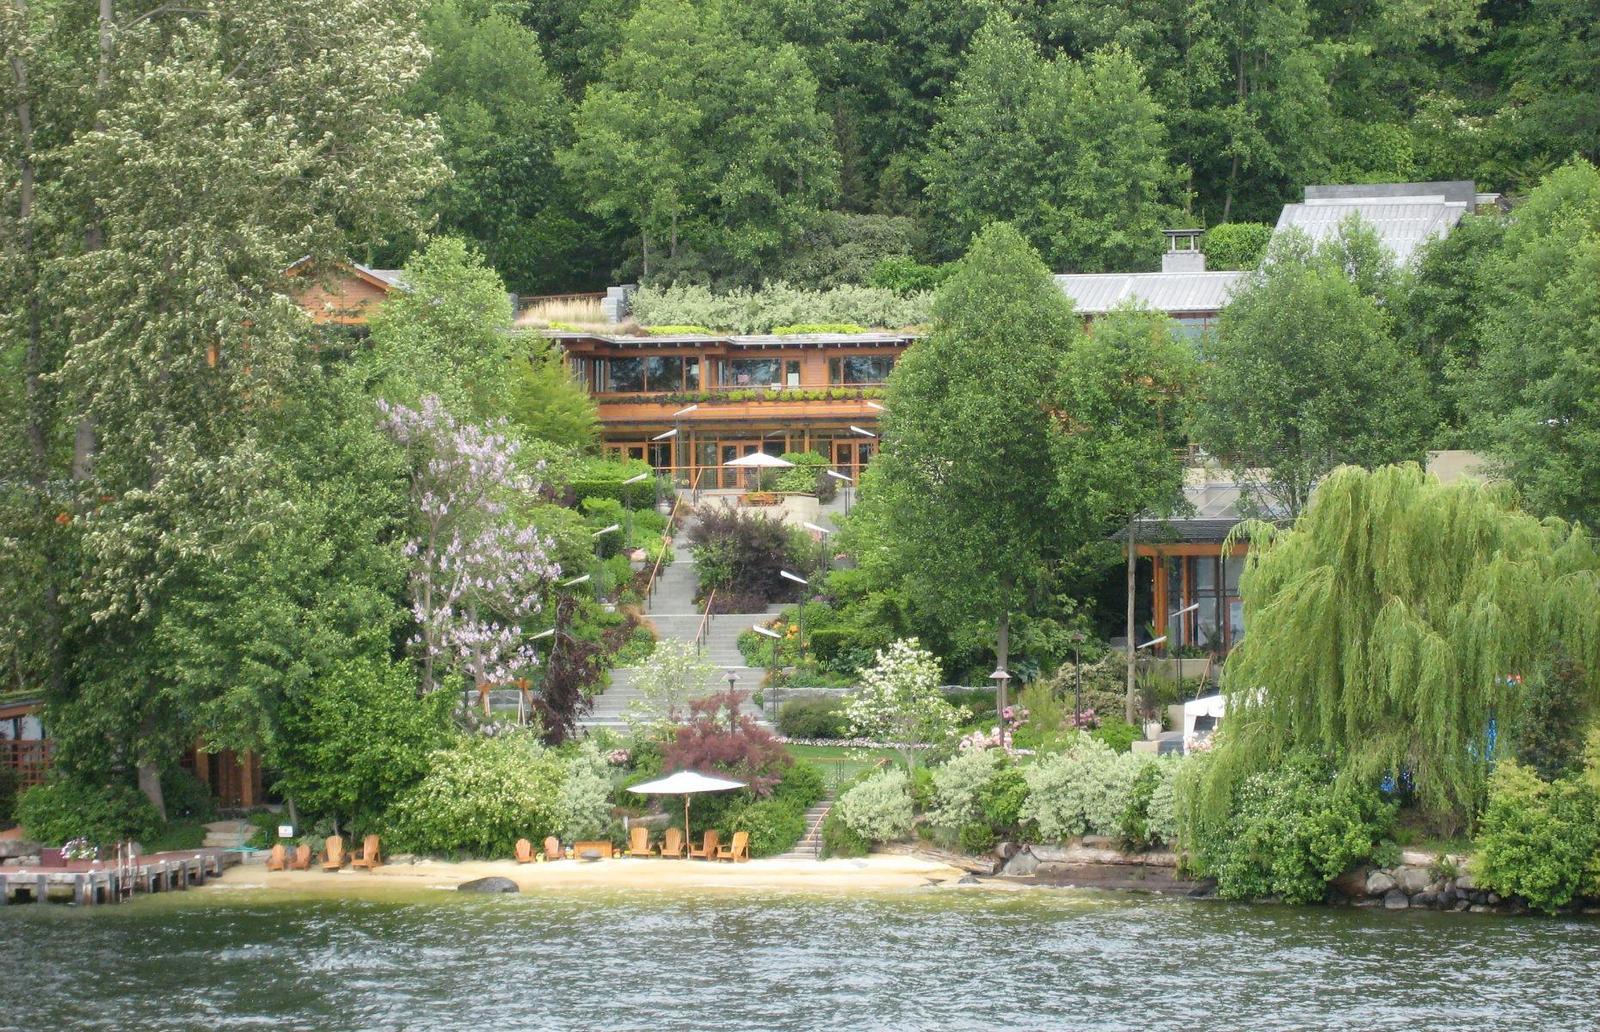 The surprising reason why Bill Gates' modest ex-wife Melinda never liked his $120 million Washington mansion. The 66,000 sq.ft tech-laden home has six kitchens, an artificial beach, a trampoline room, and even an artificial stream.